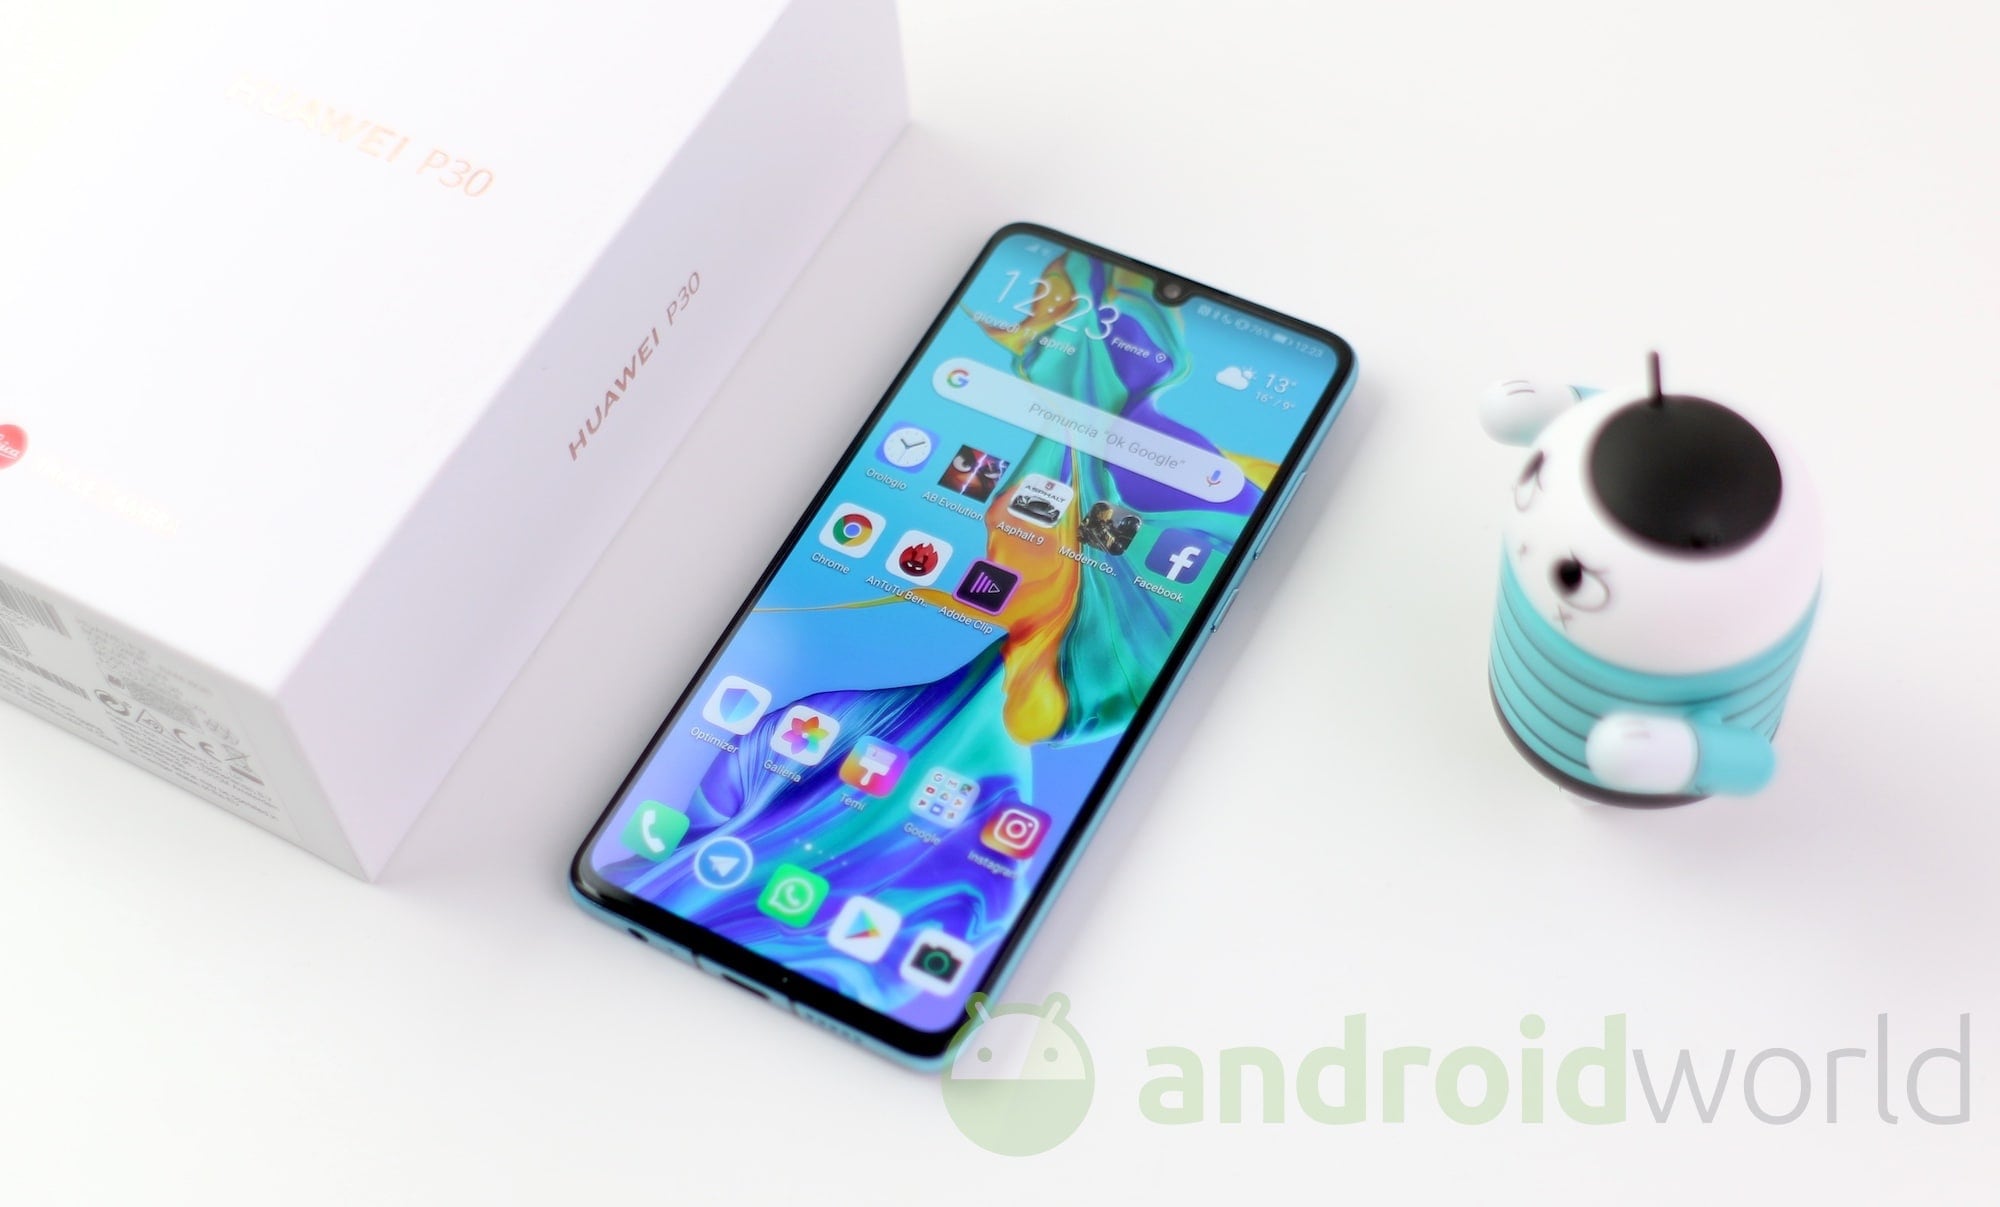 https://www.androidworld.it/wp-content/uploads/2019/08/Huawei-P30-def-8.jpg